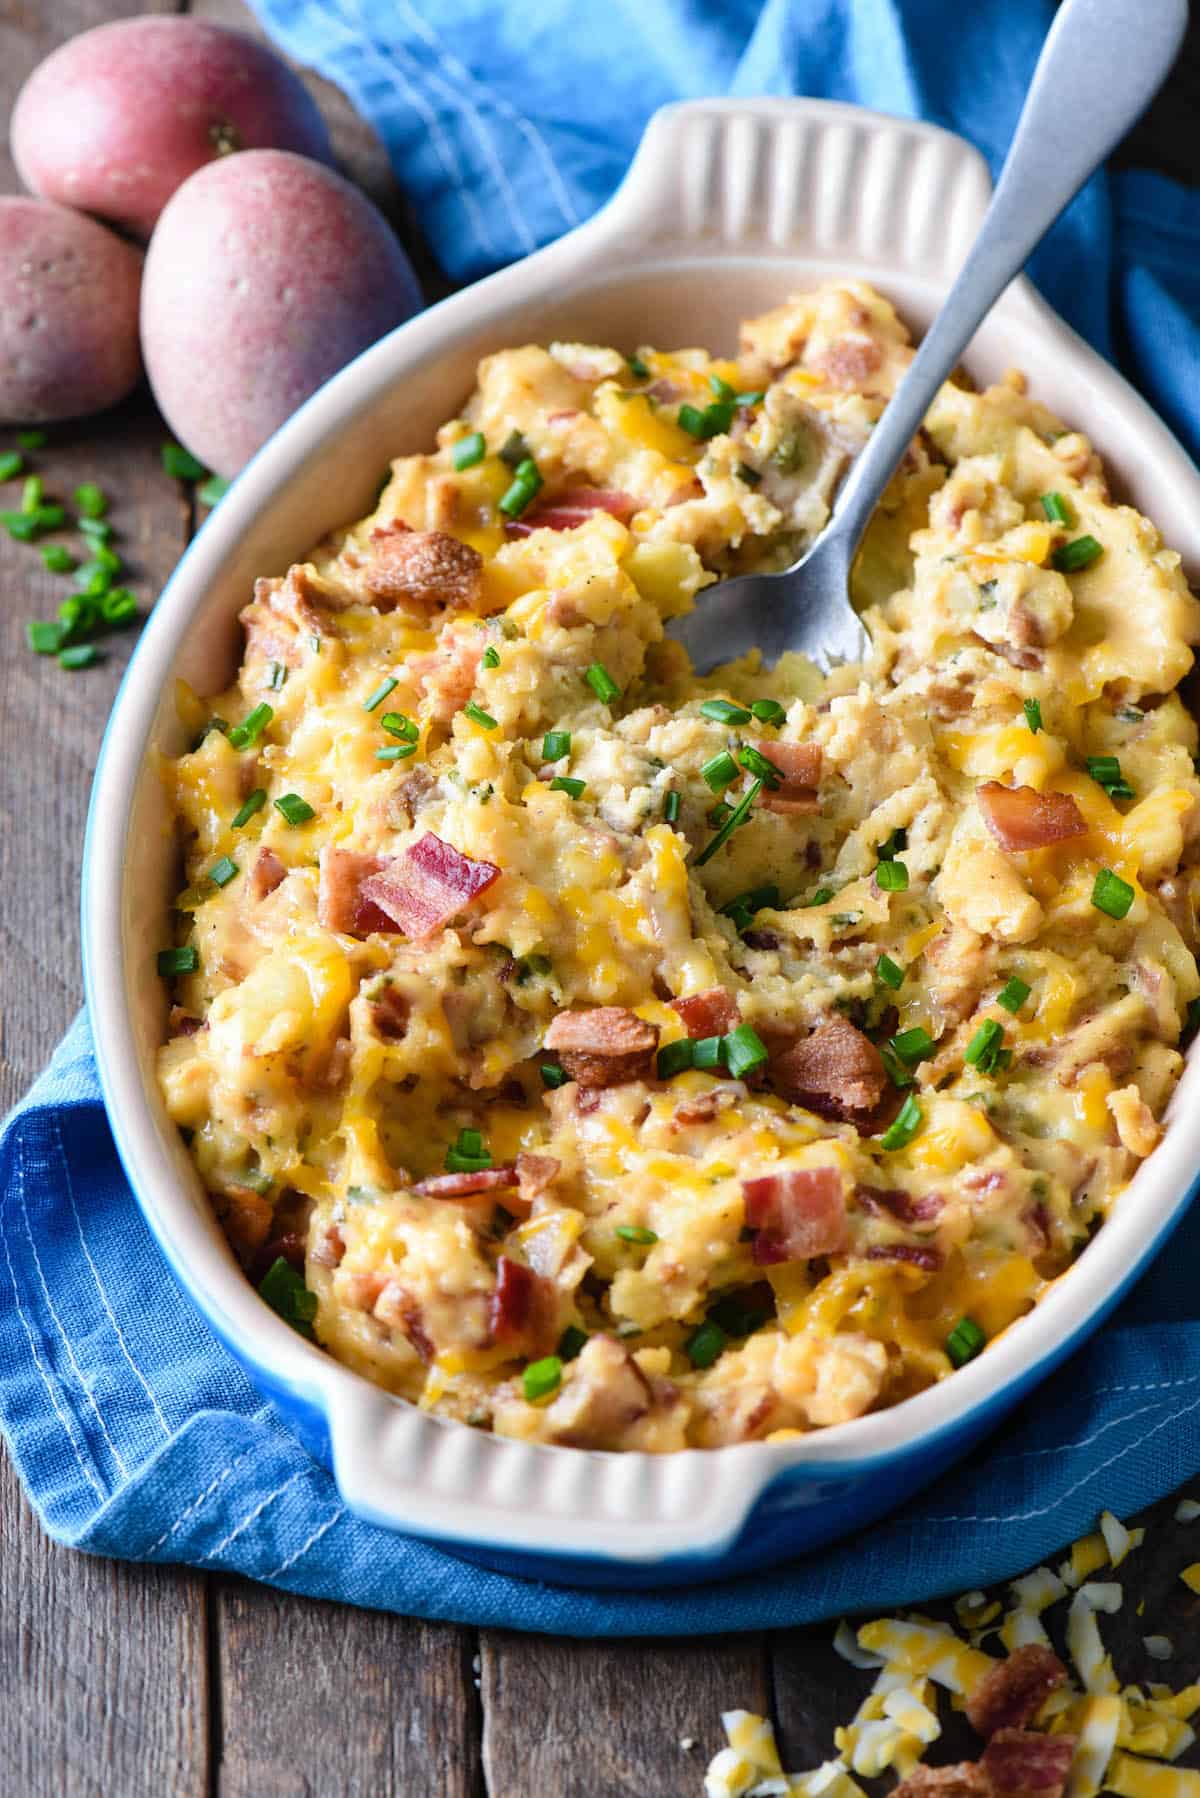 This Twice Baked Potato Casserole recipe is a perfect holiday side dish, but easy enough to make anytime. Smashed potatoes are mixed with cheese and bacon for a comforting and delicious casserole. | foxeslovelemons.com